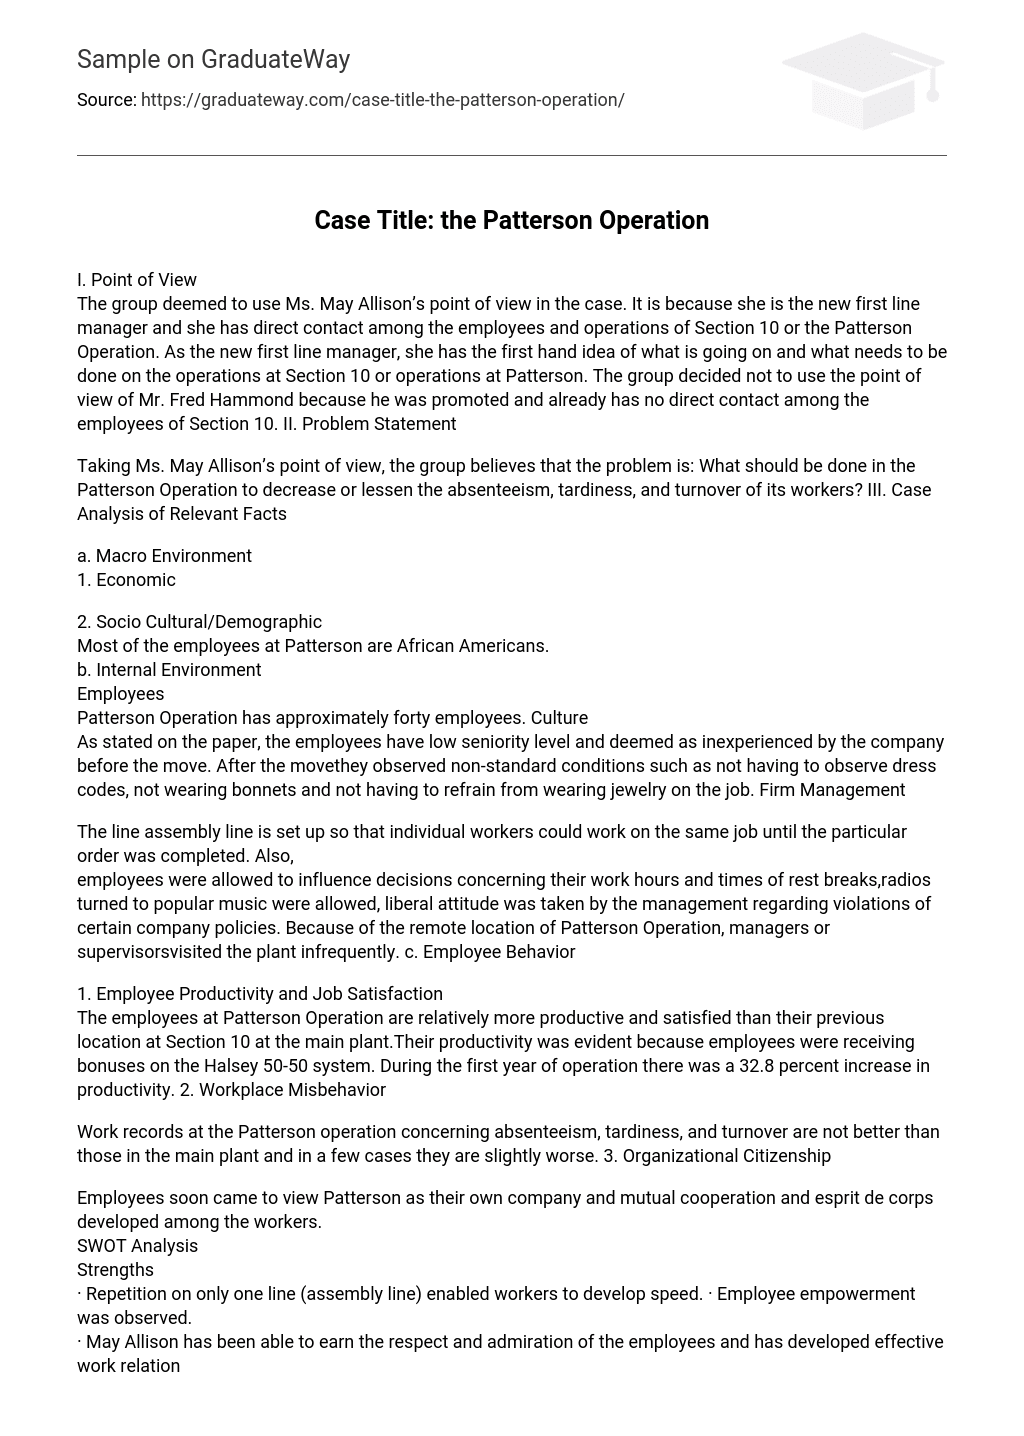 Case Title: the Patterson Operation Analysis